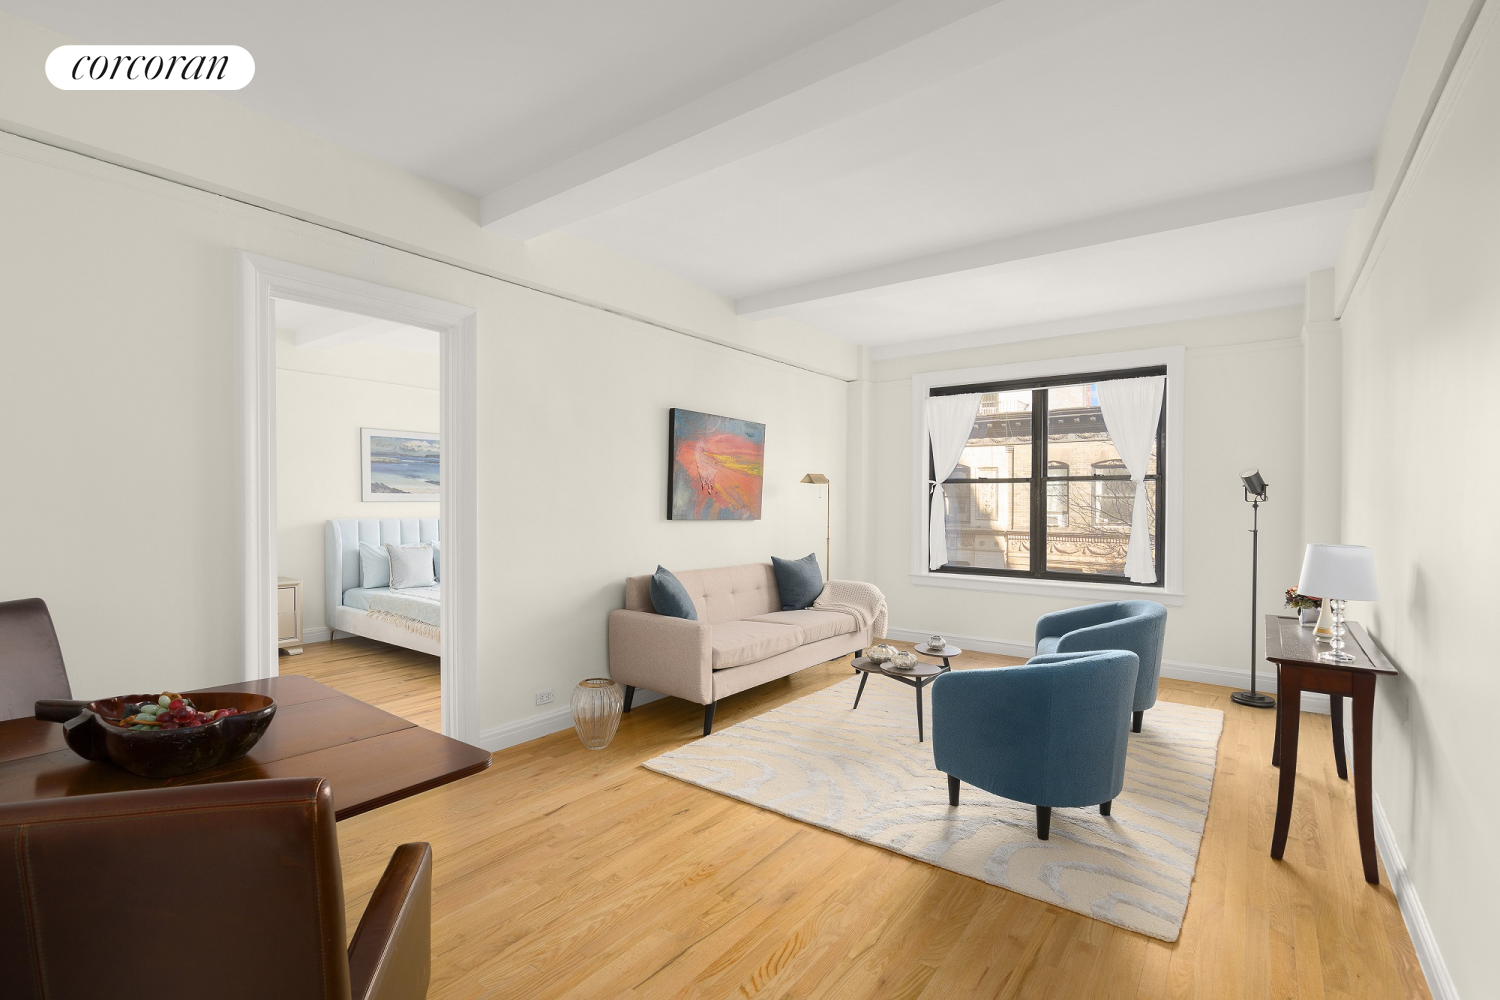 60 West 68th Street 6C, Lincoln Sq, Upper West Side, NYC - 2 Bedrooms  
2 Bathrooms  
4 Rooms - 